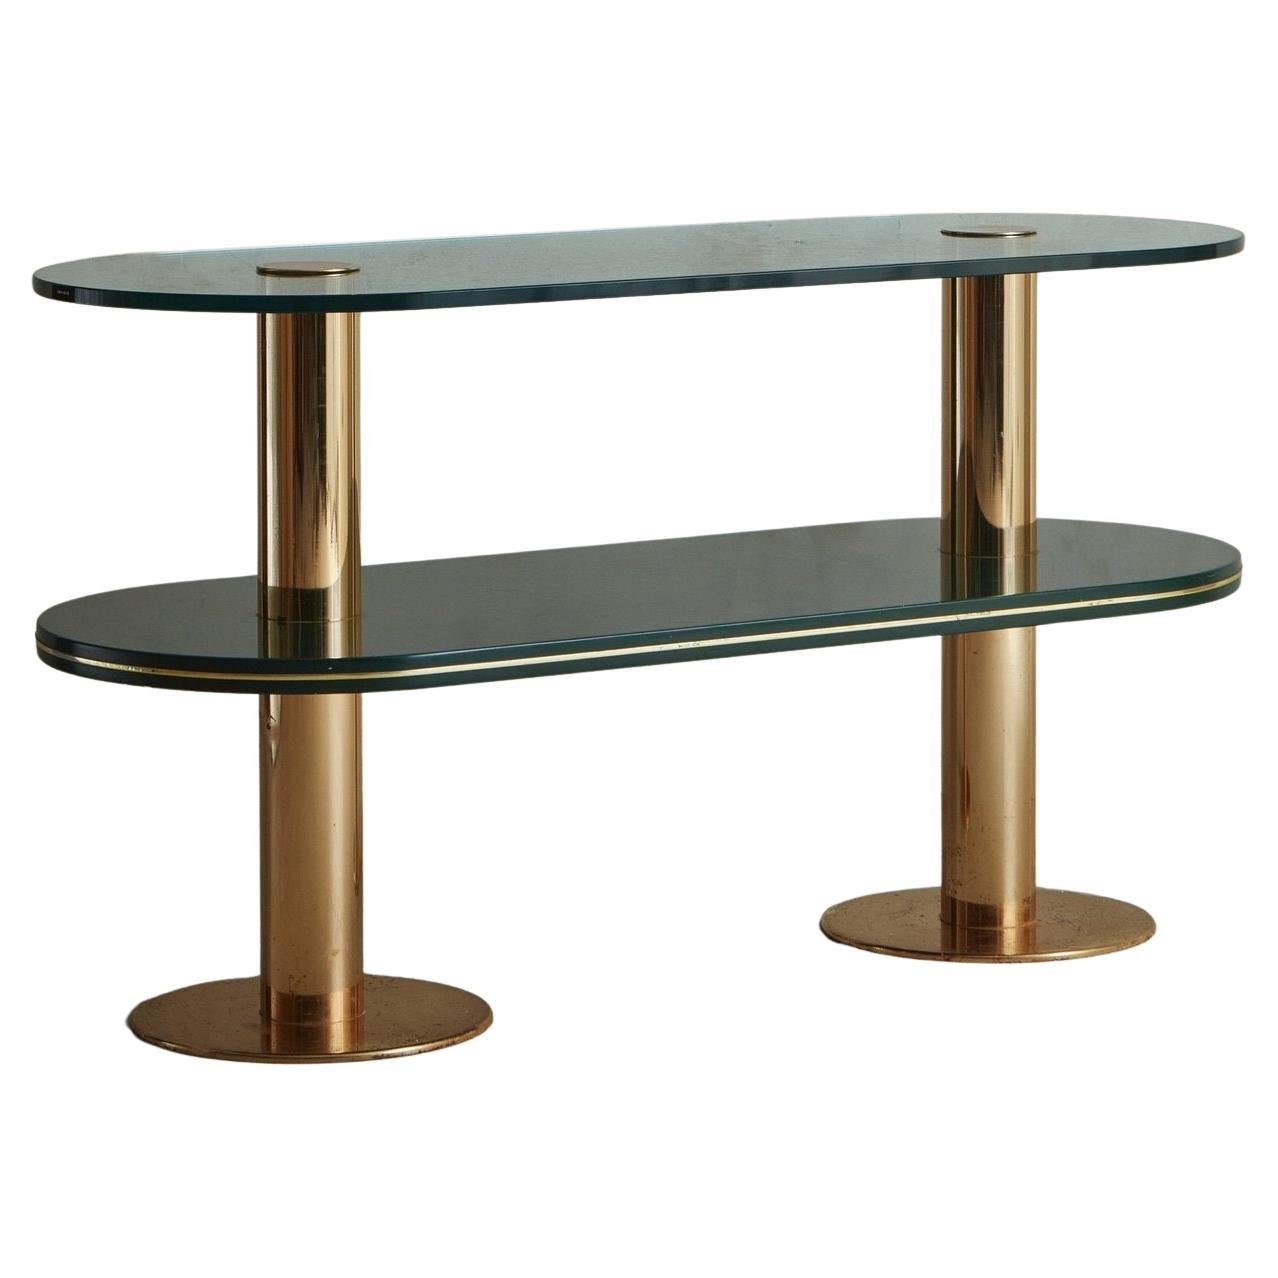 Italian Two-Tier Brass Console Table with Green Glass Shelves, 20th Century